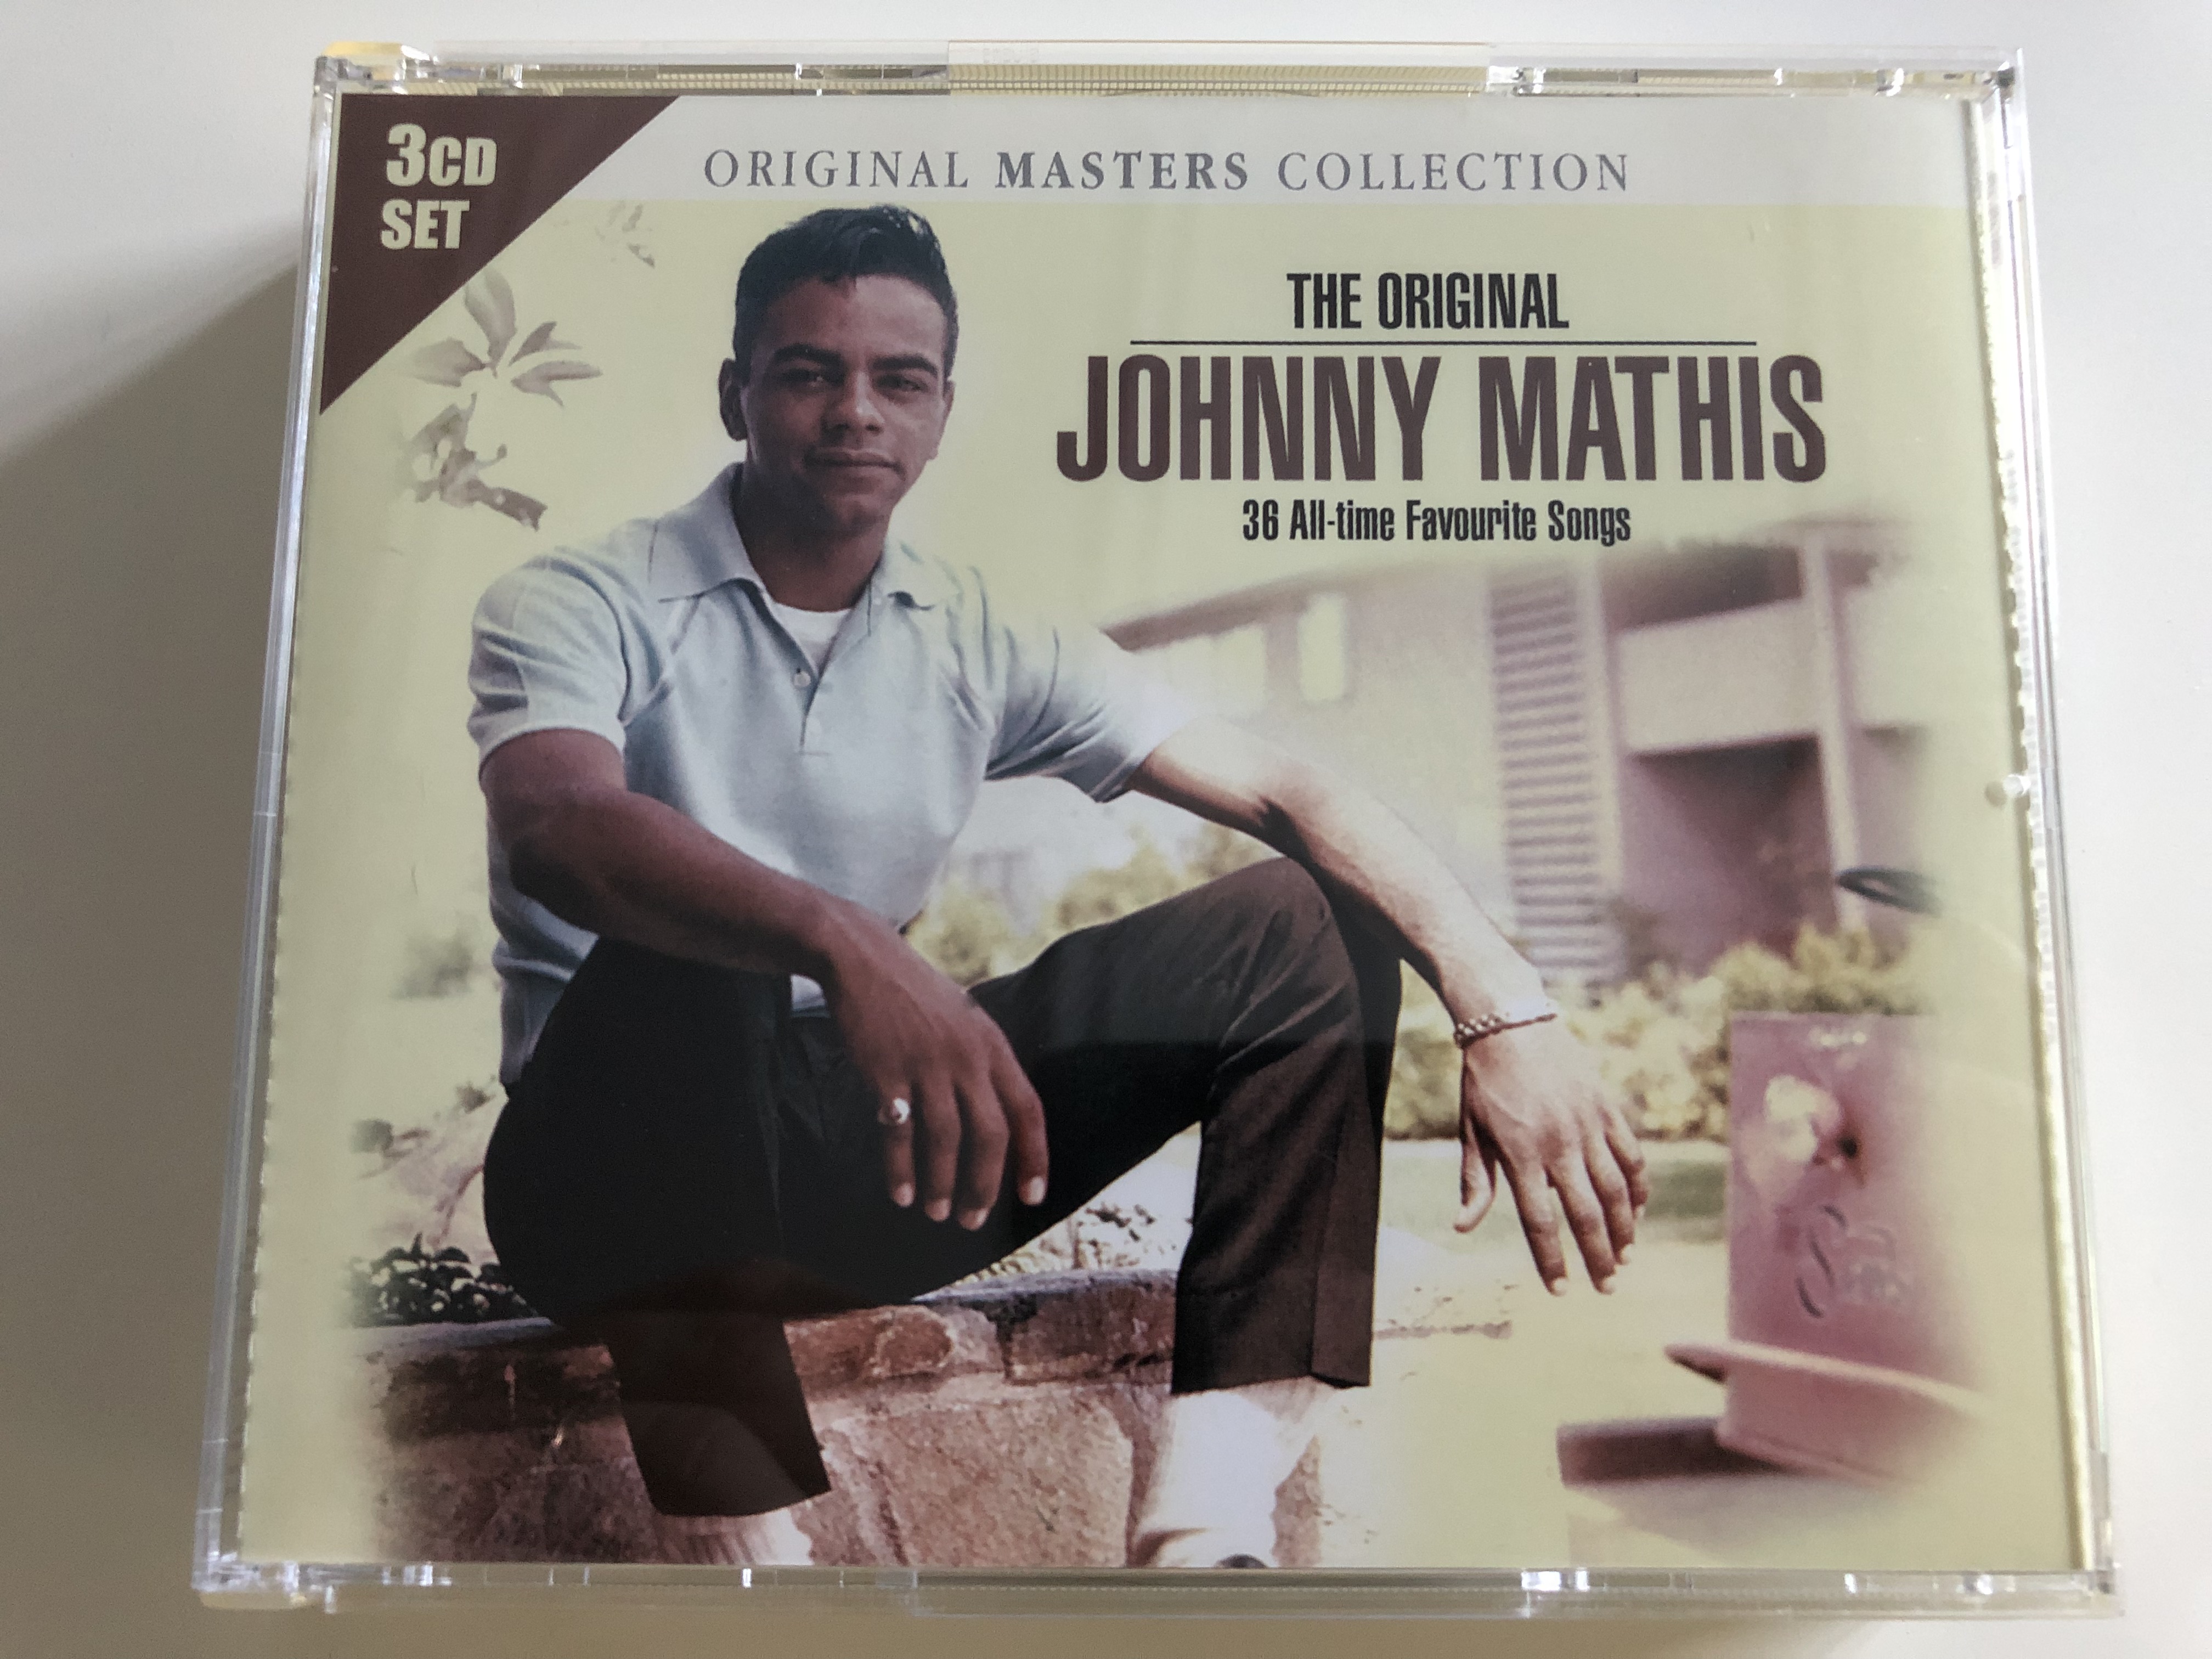 the-original-johnny-mathis-38-all-time-favourite-songs-3-cd-set-original-masters-collections-play-3-011-1-.jpg